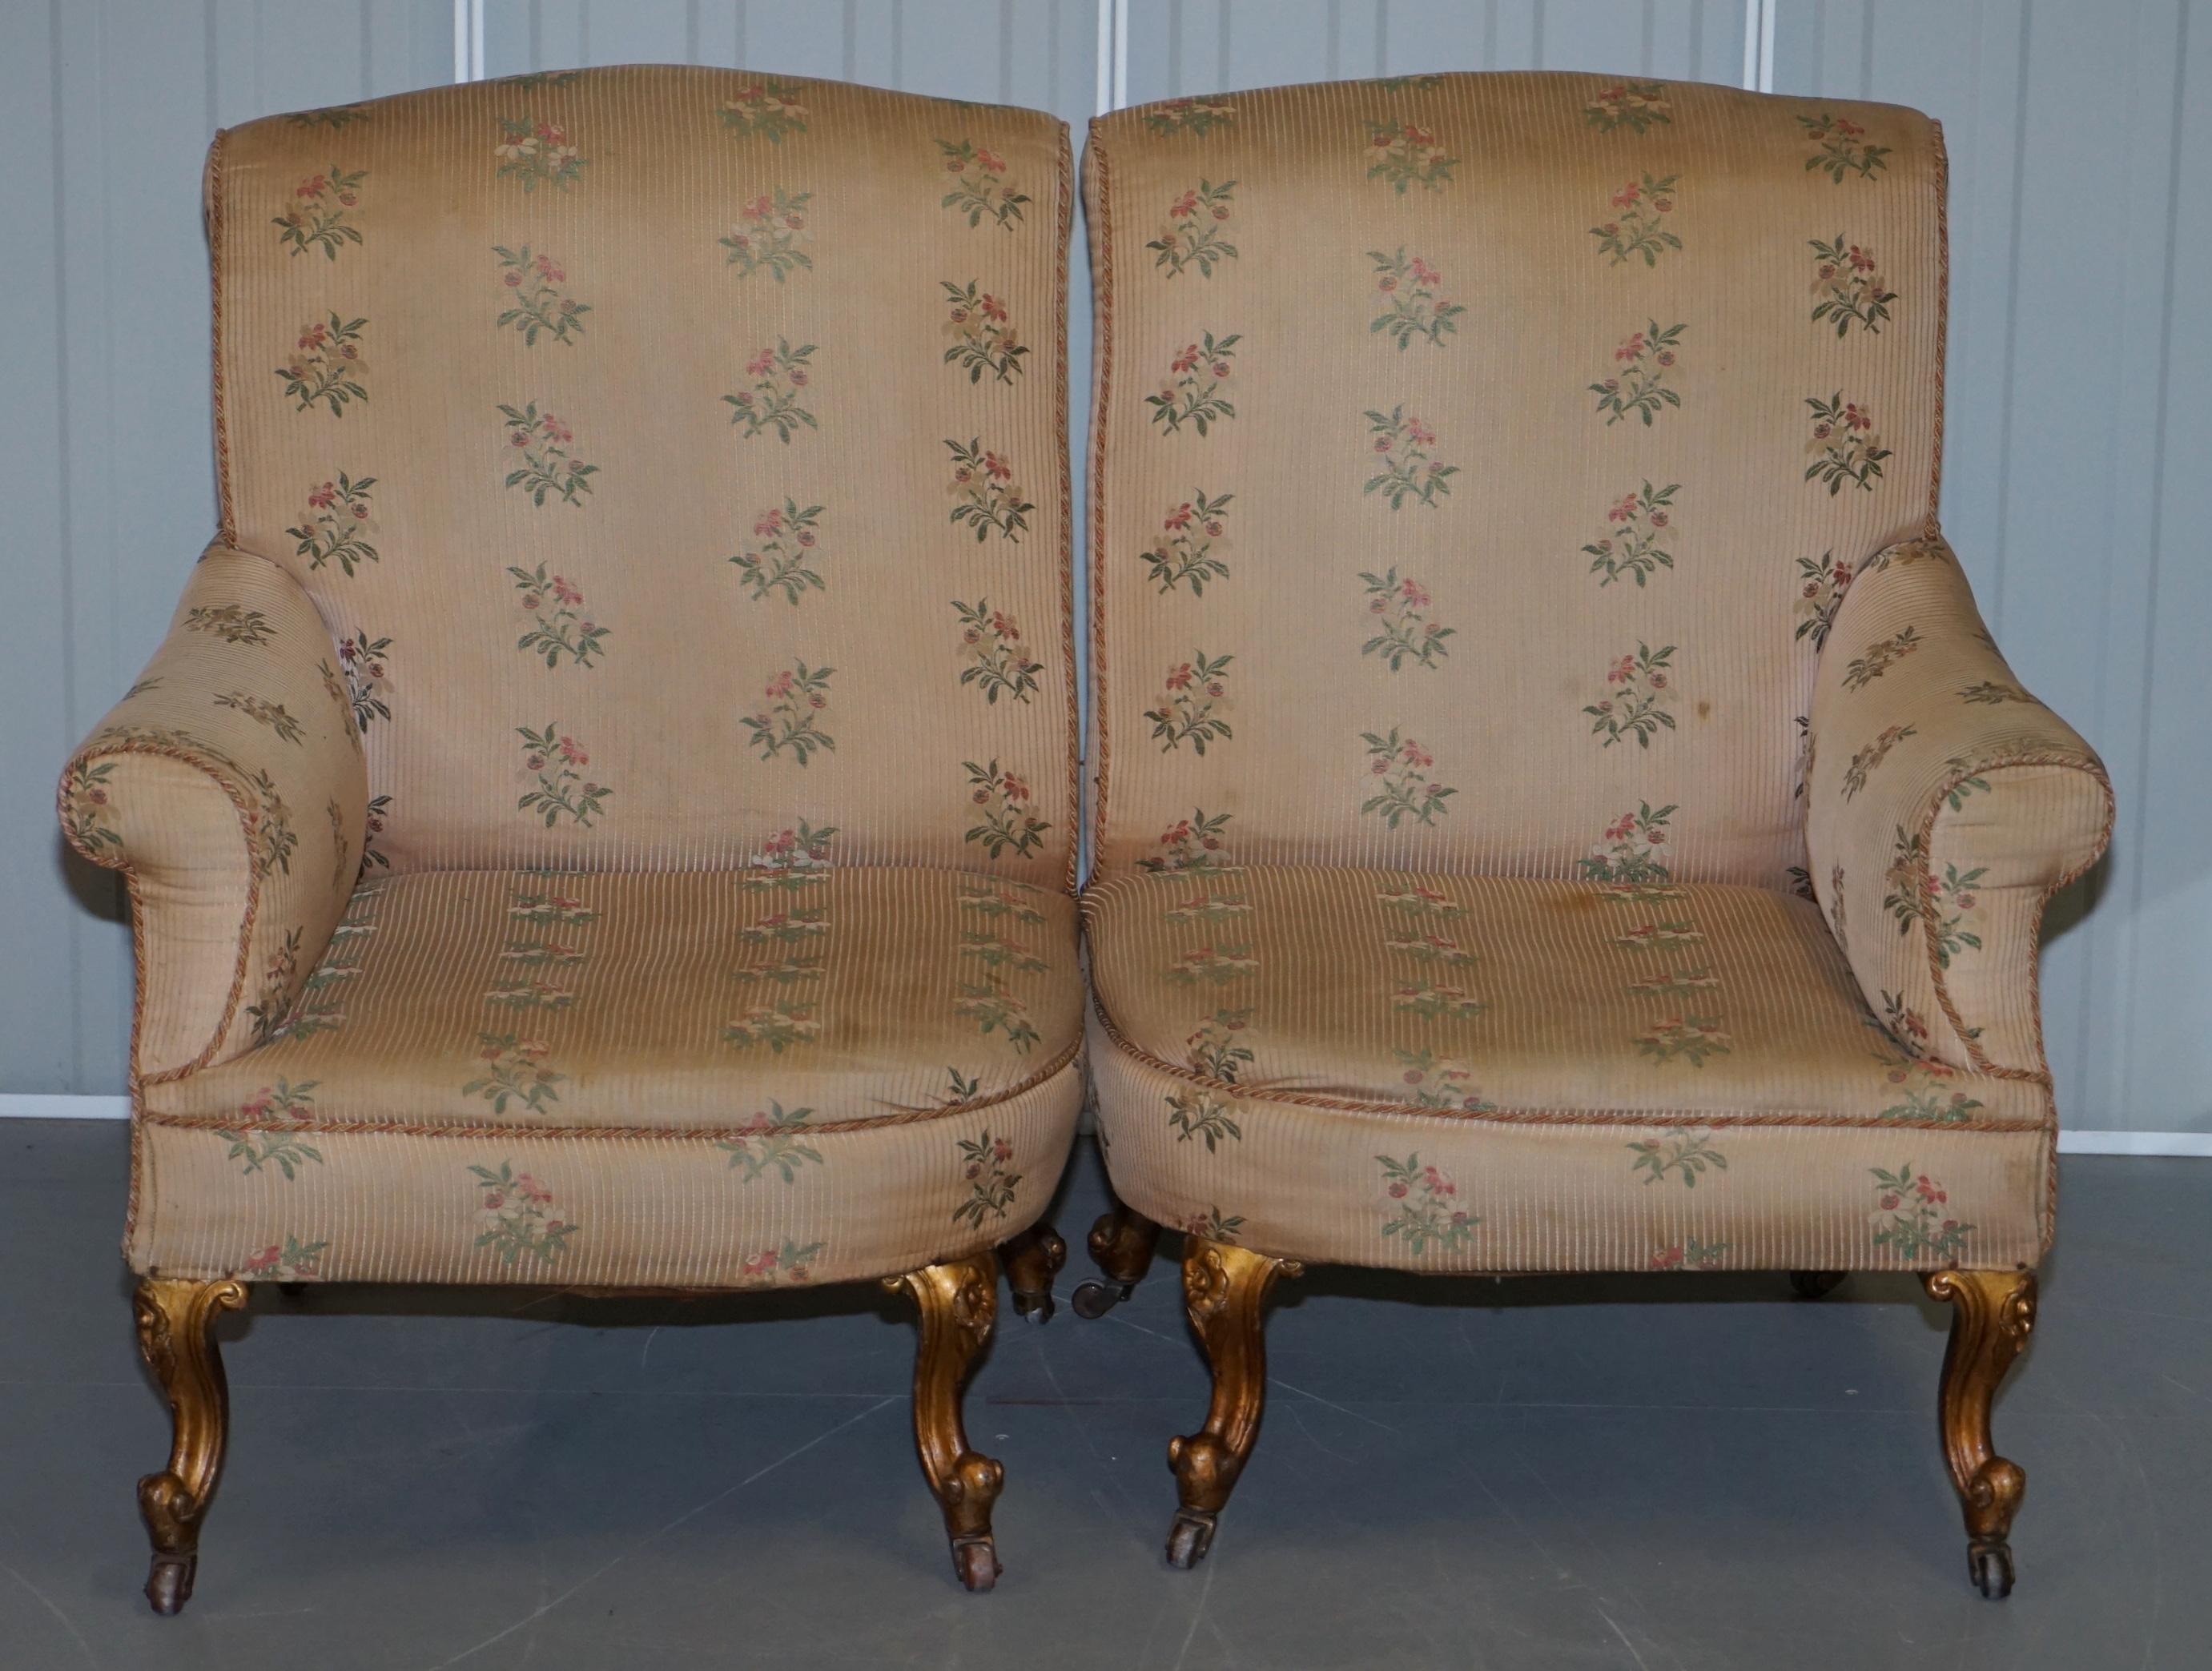 English Rare Pair of Giltwood Victorian Asymmetrical Armchairs Embroidered Bird Covers For Sale